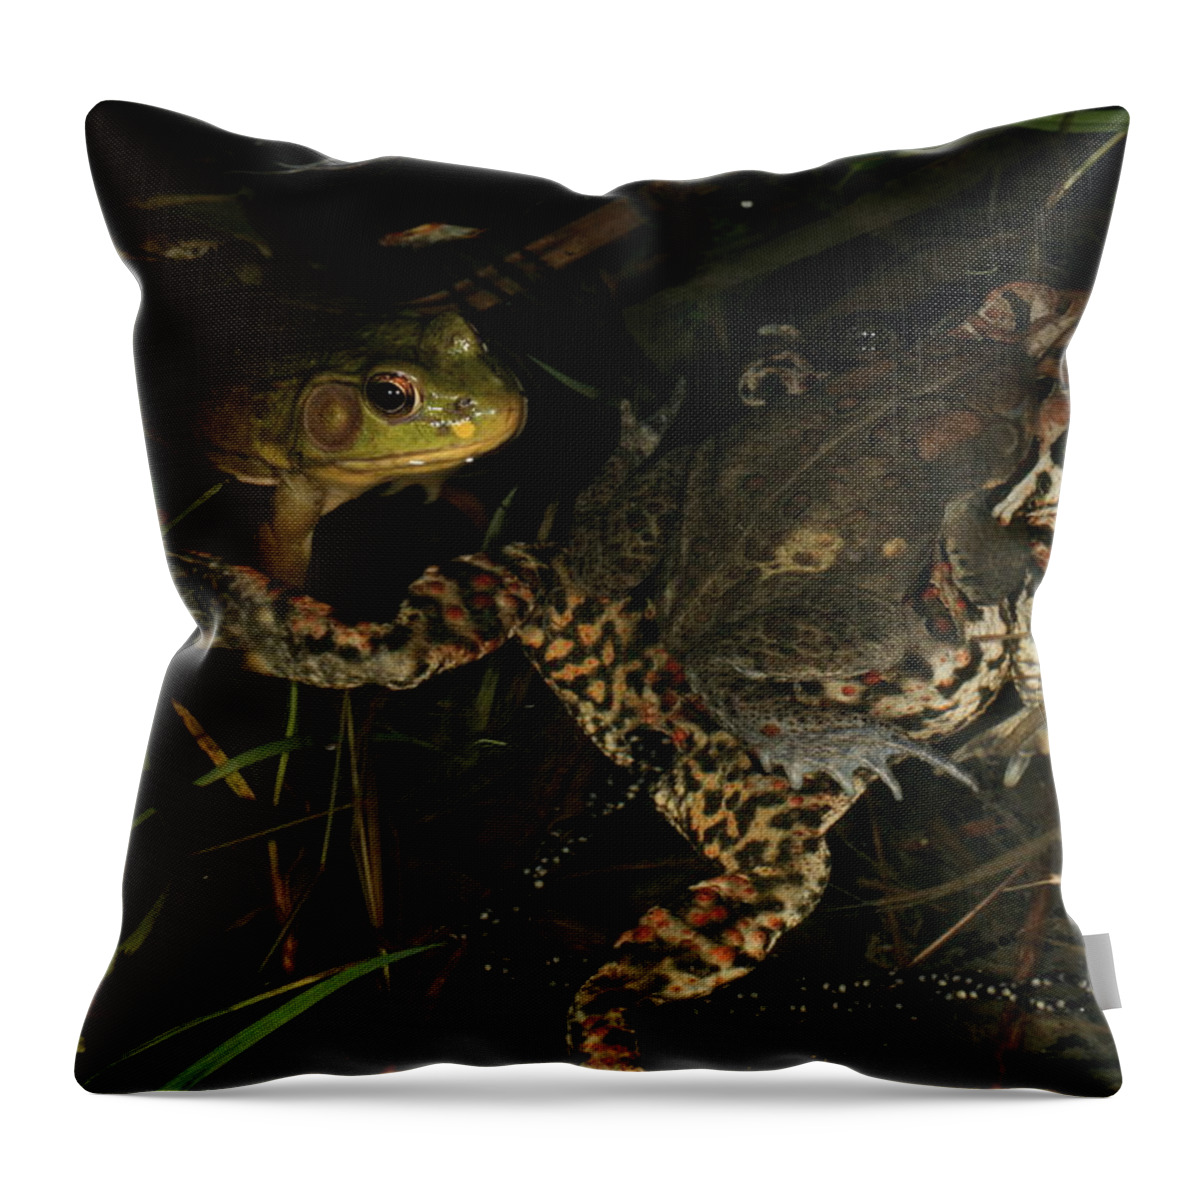 Frog Throw Pillow featuring the photograph Amphibian Voyerism by Bruce J Robinson